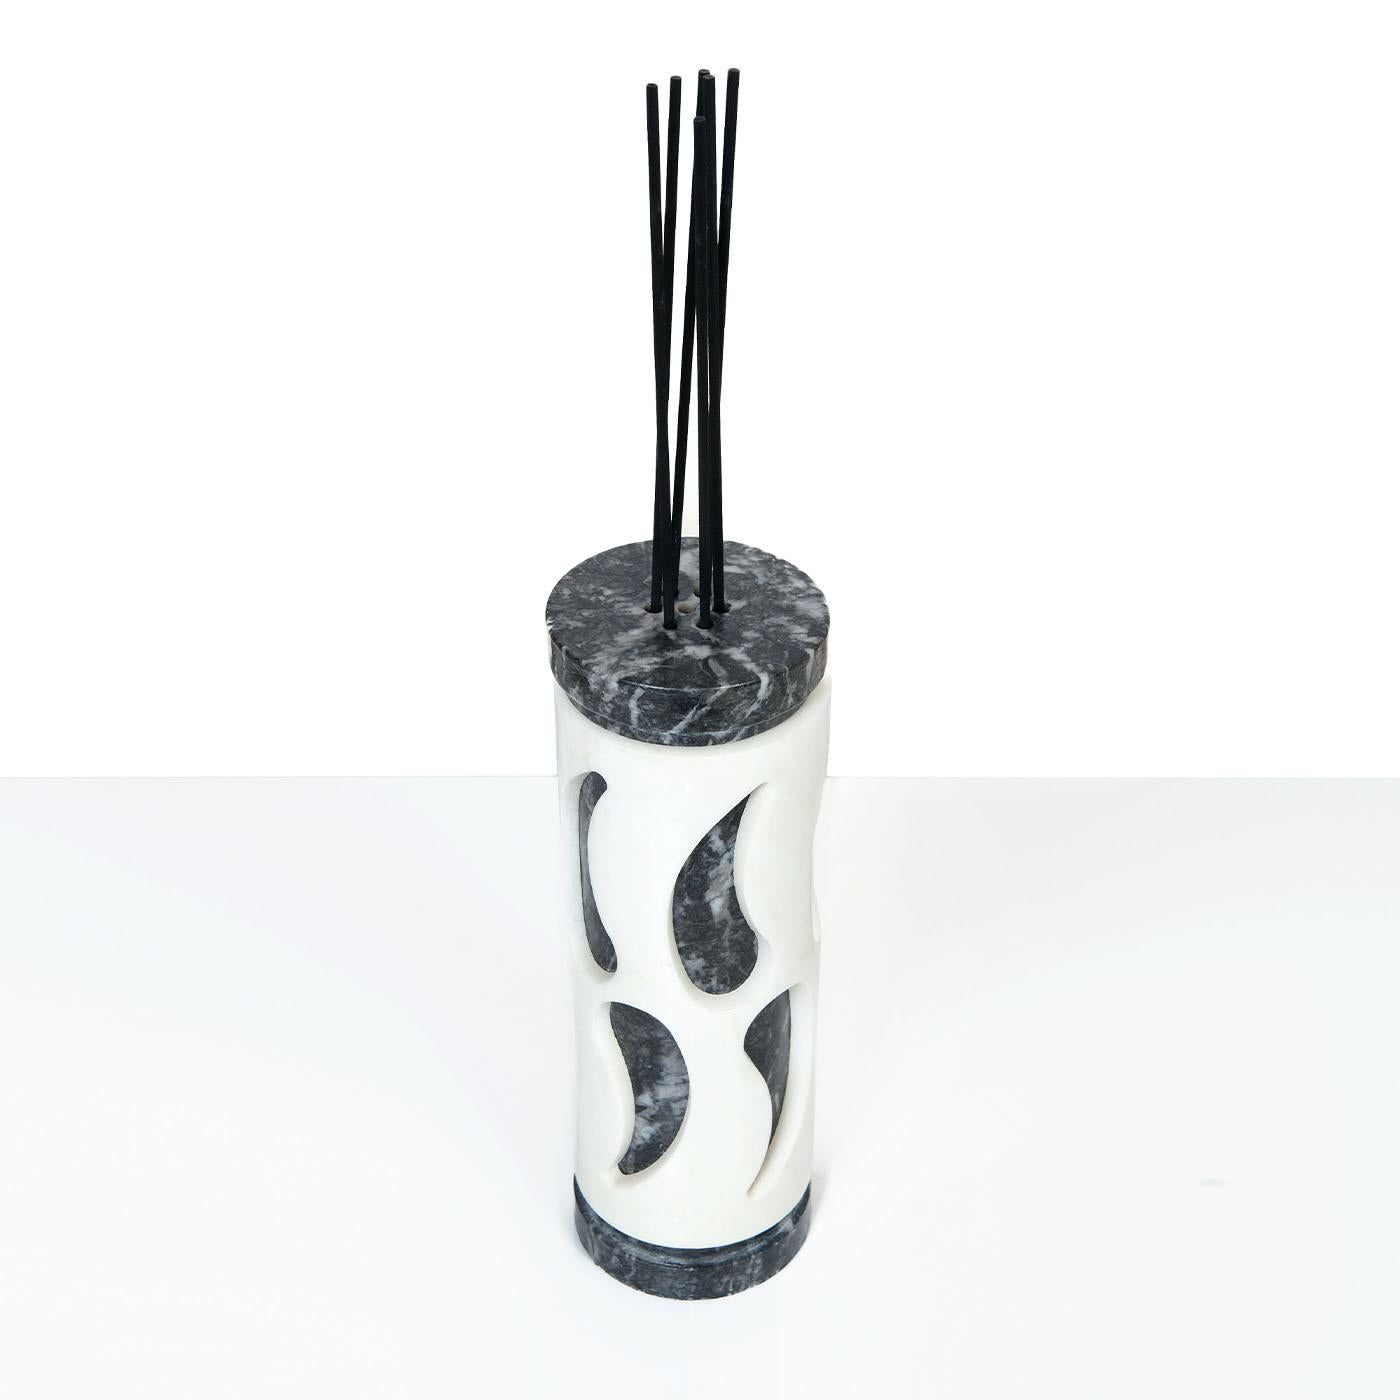 A marvelous design to display in any room of a contemporary interior, this cylindric diffuser is deftly handmade of gray Carnico and Statuario Carrara marble, following meticulous and traditional techniques of craftsmanship and engraving. Please